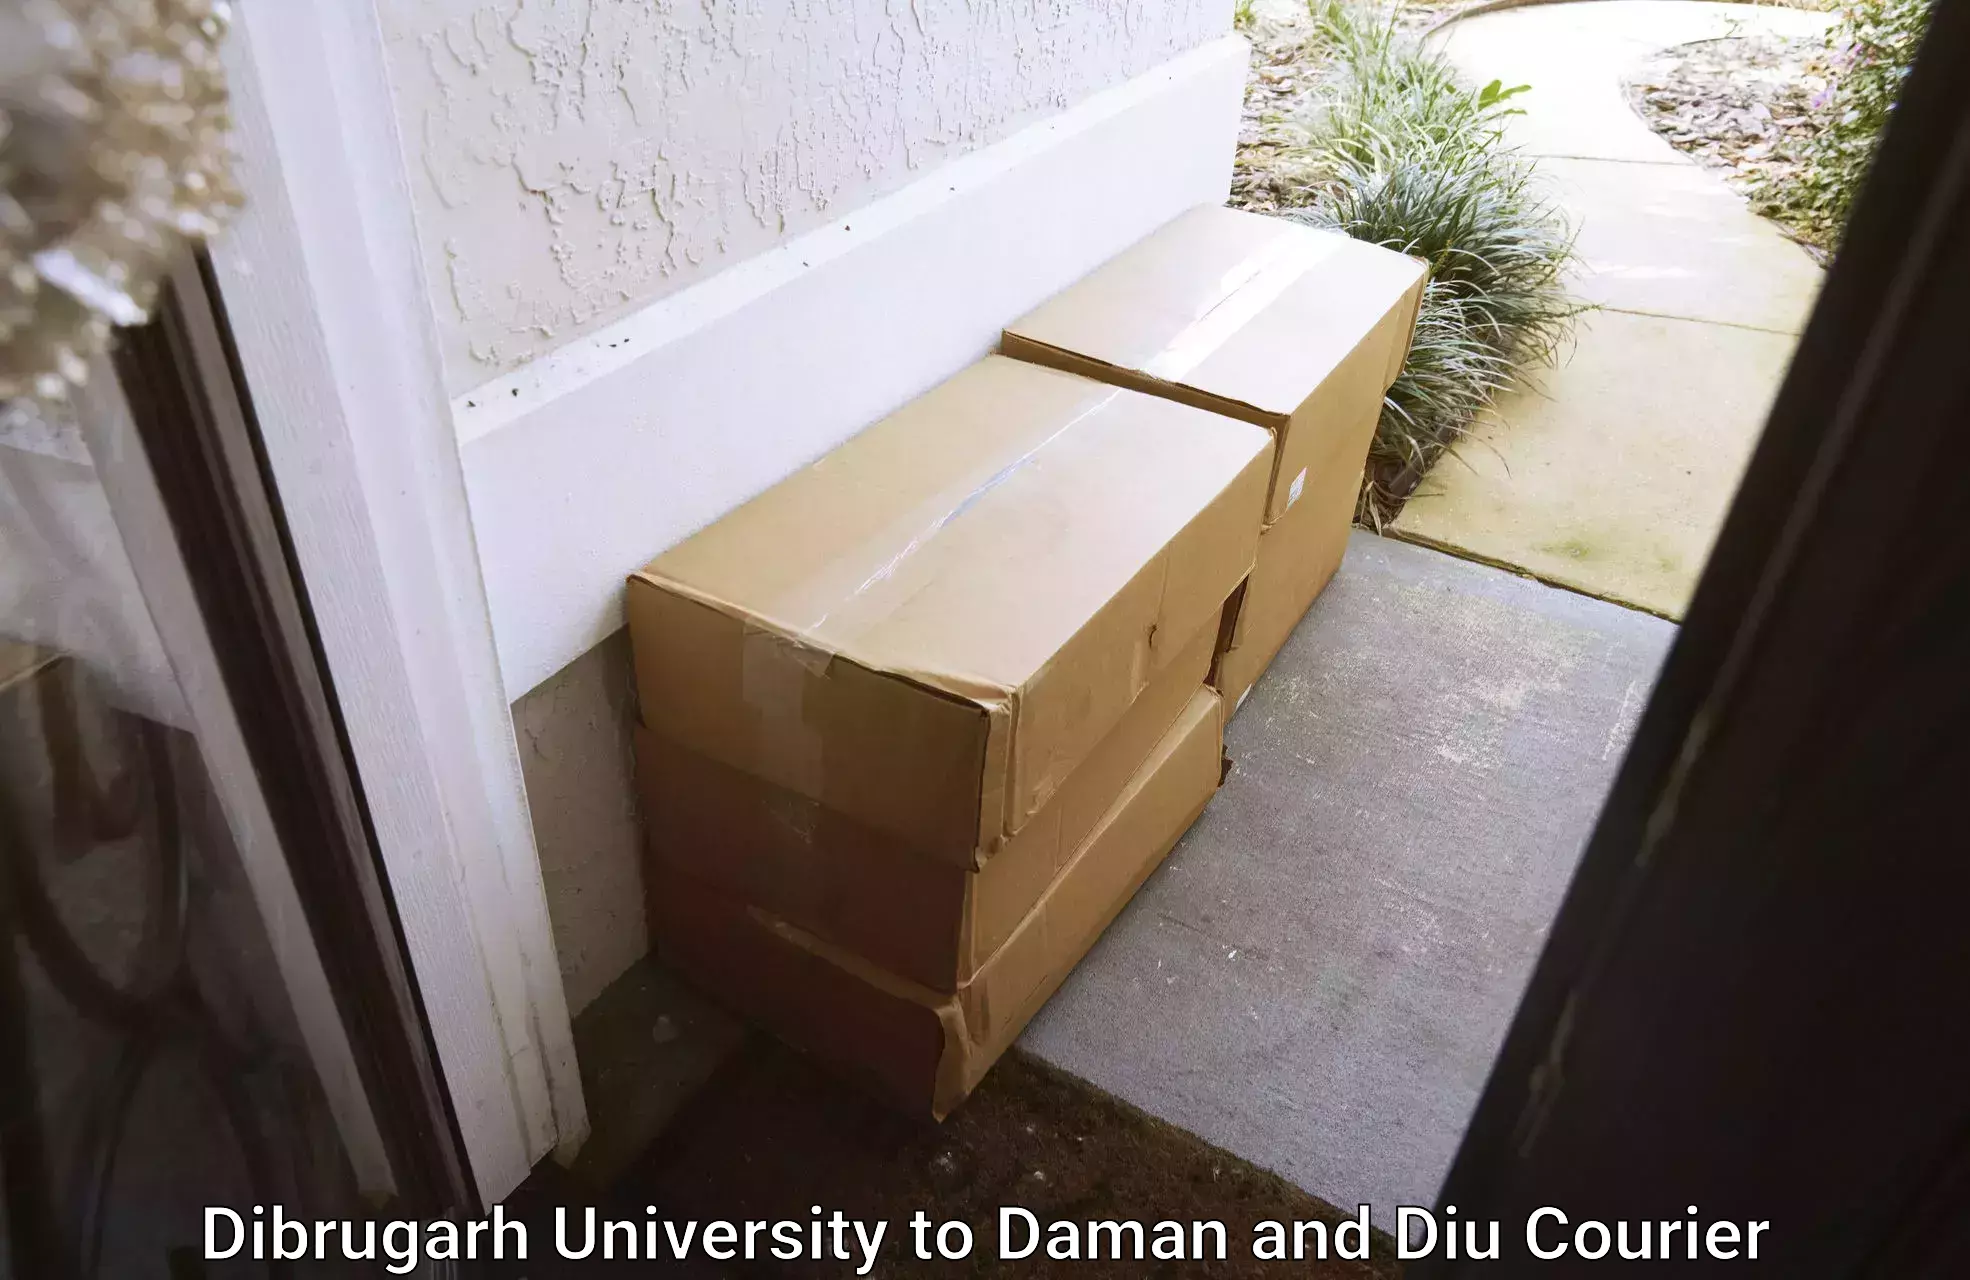 Large package courier Dibrugarh University to Daman and Diu